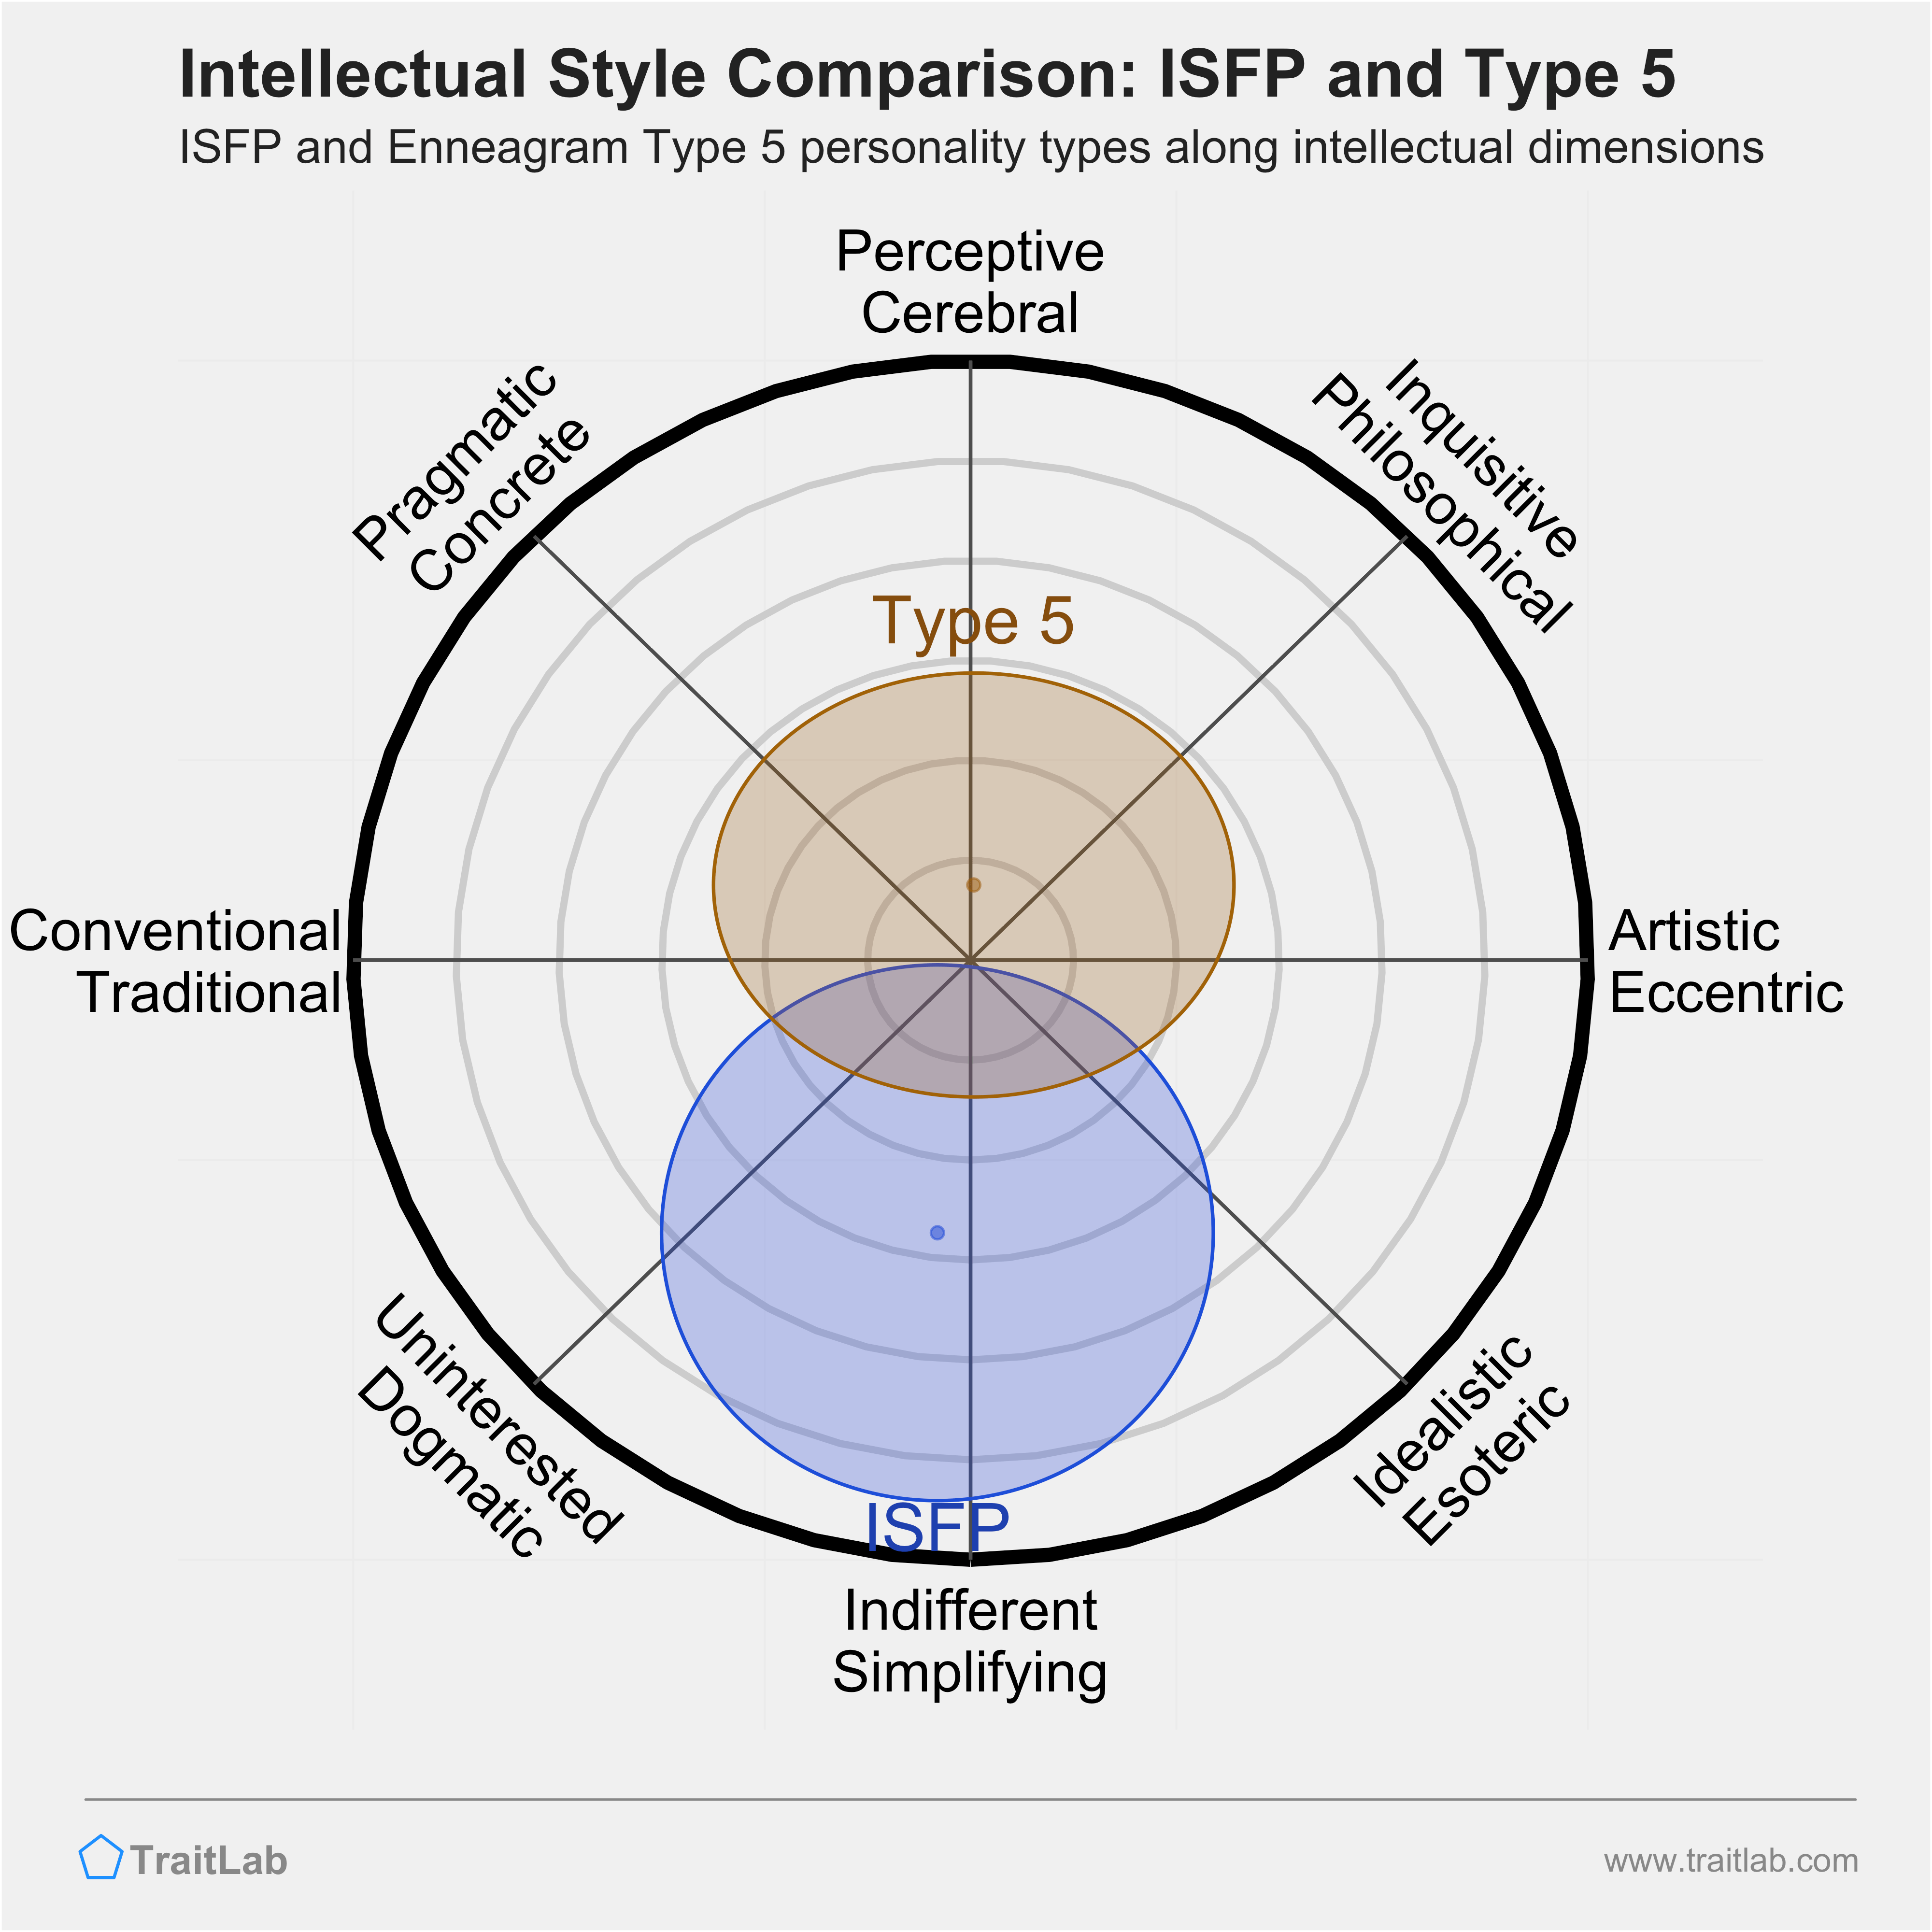 ISFP and Type 5 comparison across intellectual dimensions